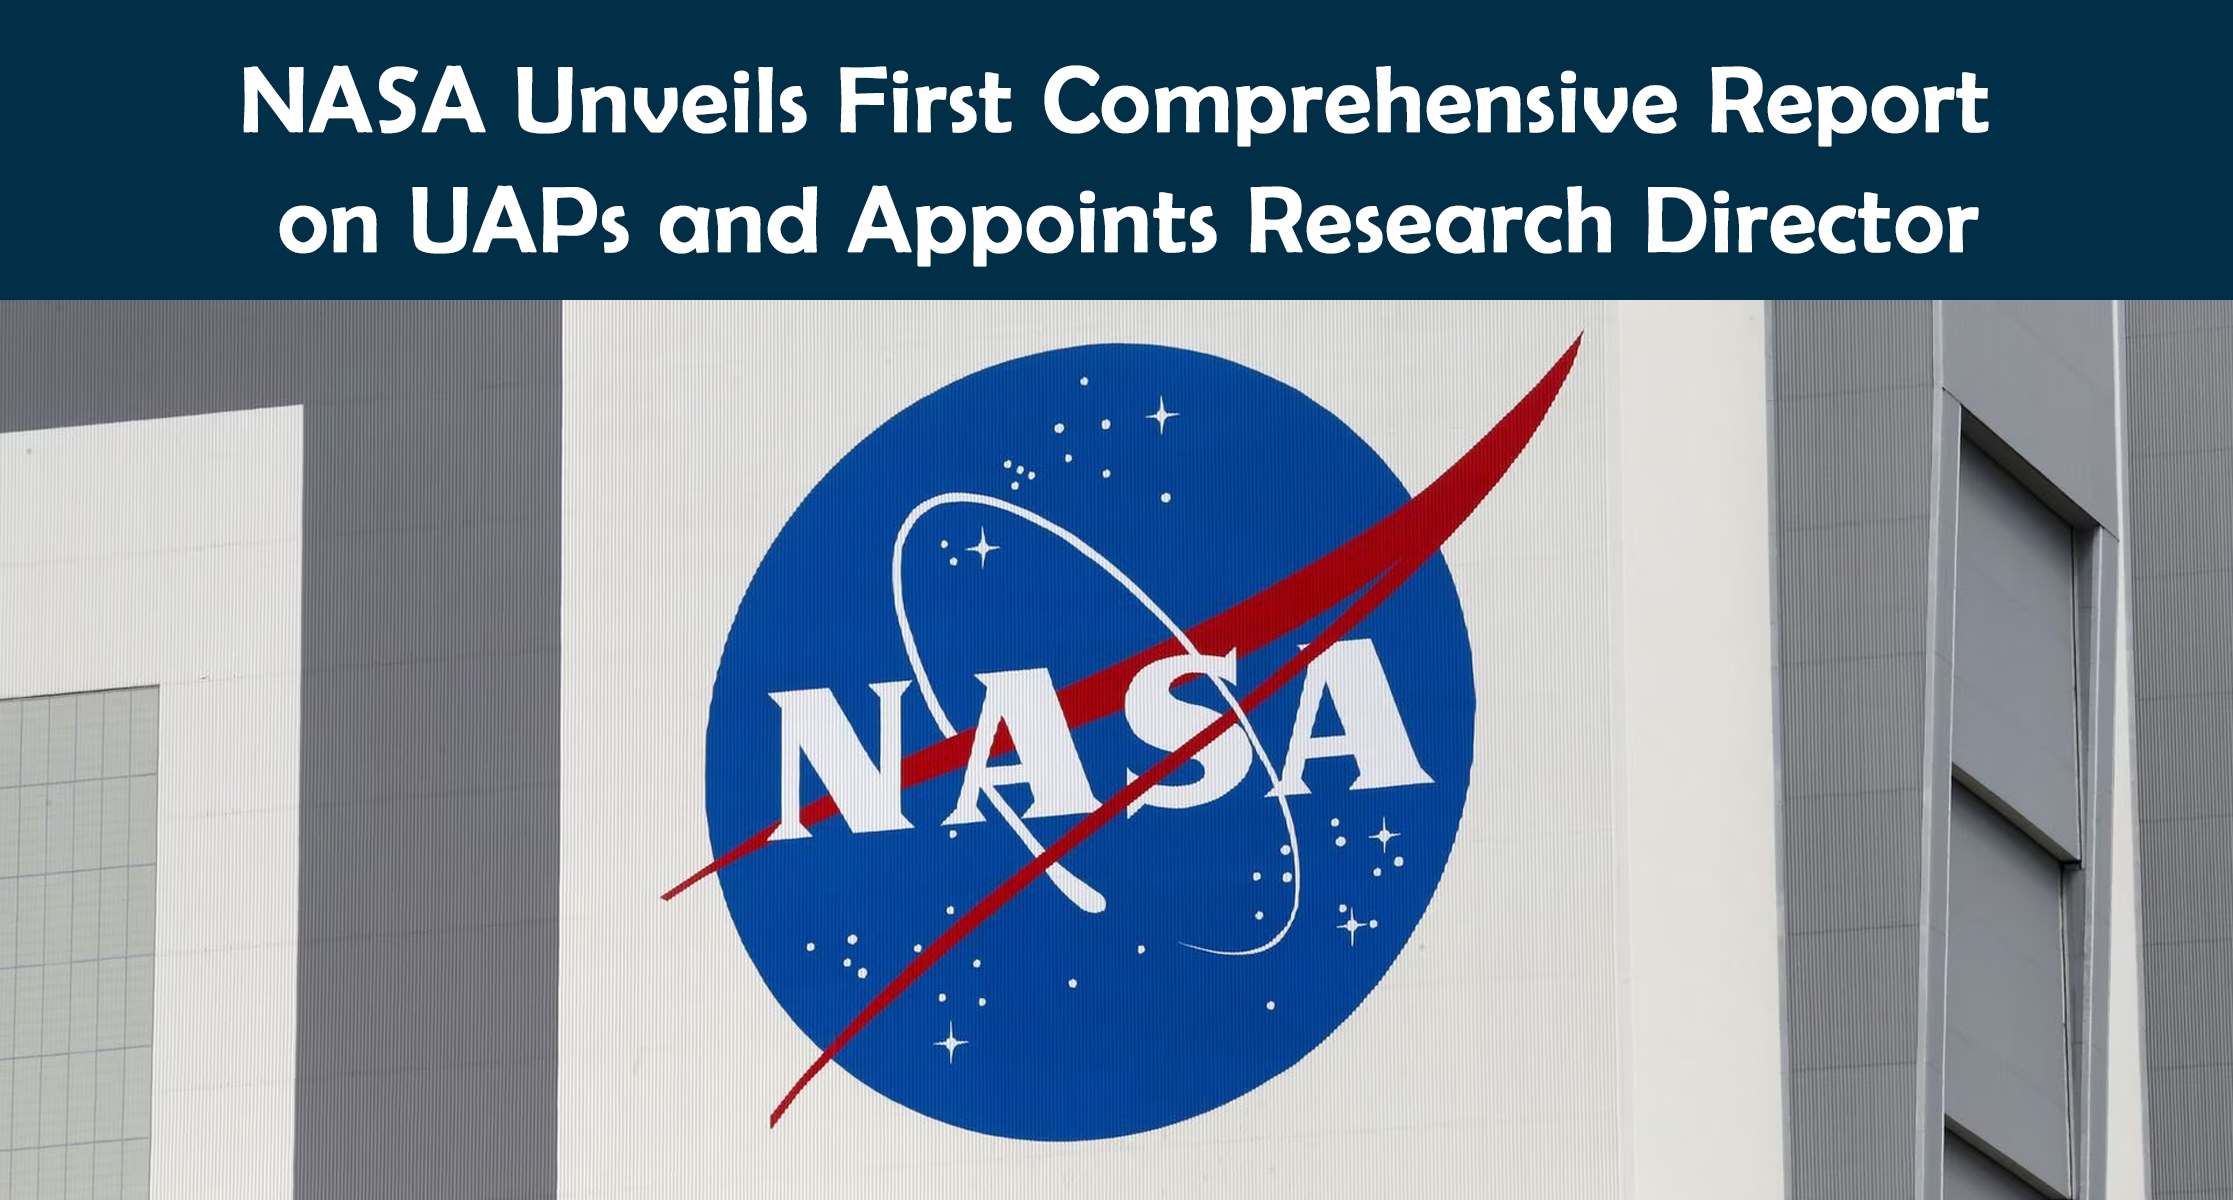 NASA Unveils First Comprehensive Report on UAPs and Appoints Research Director